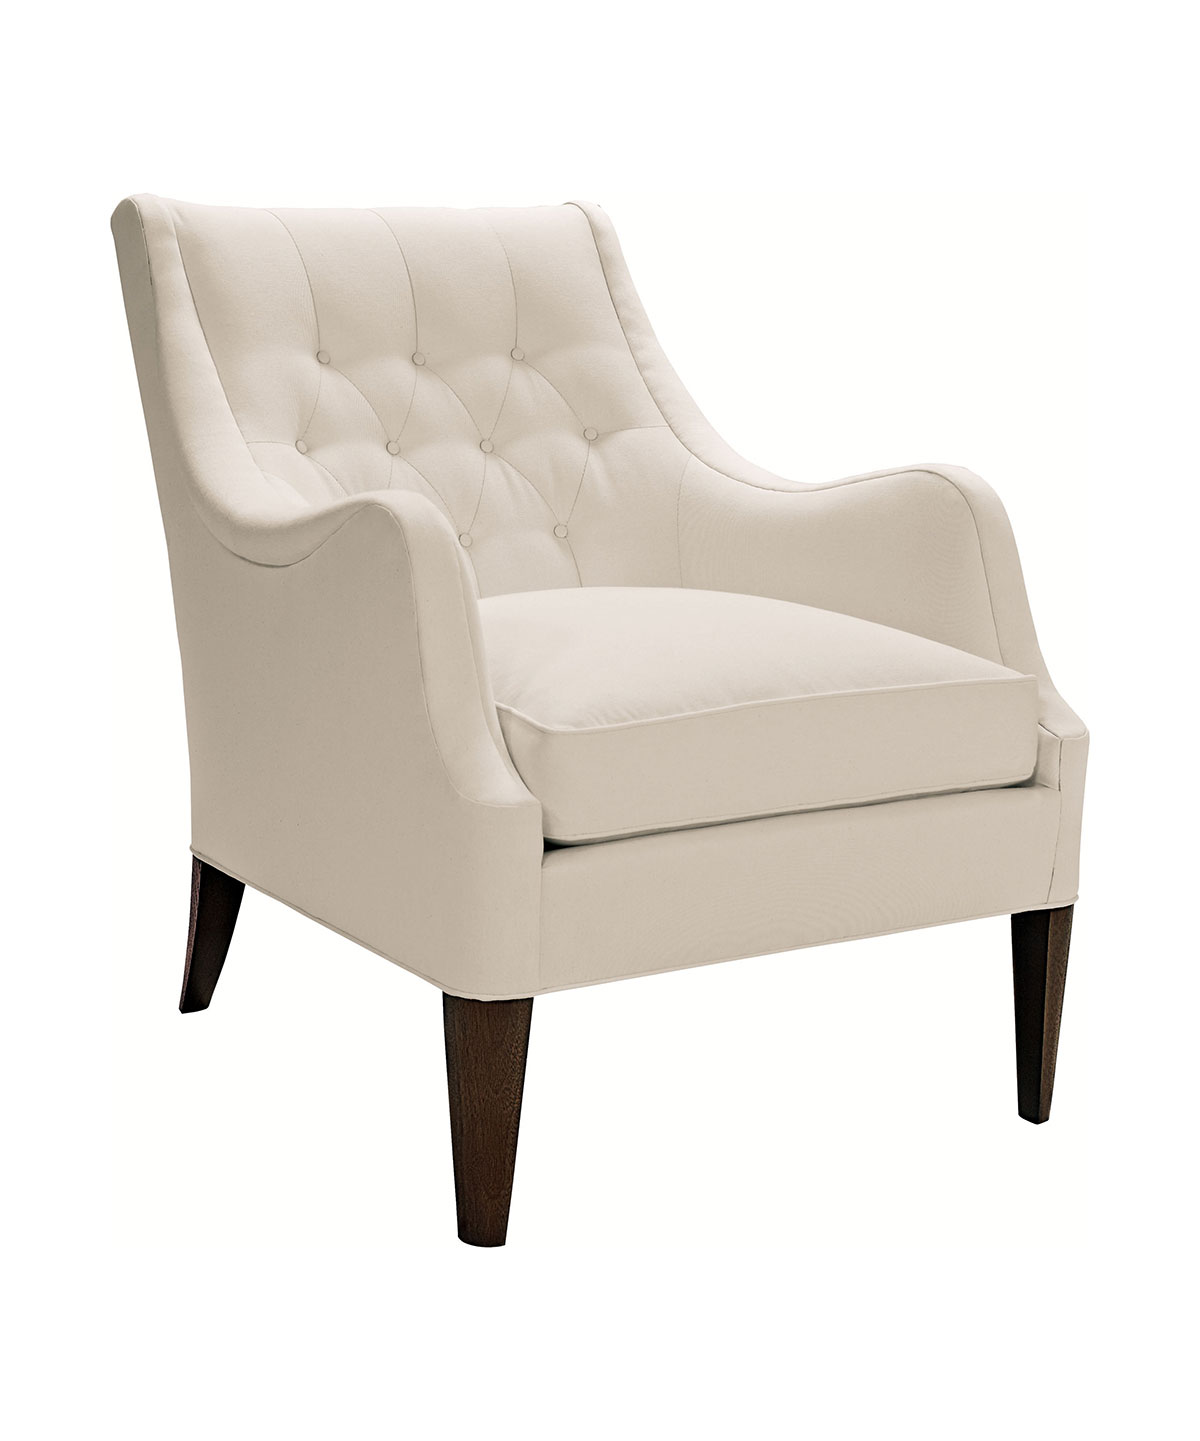 Ludlow Chair